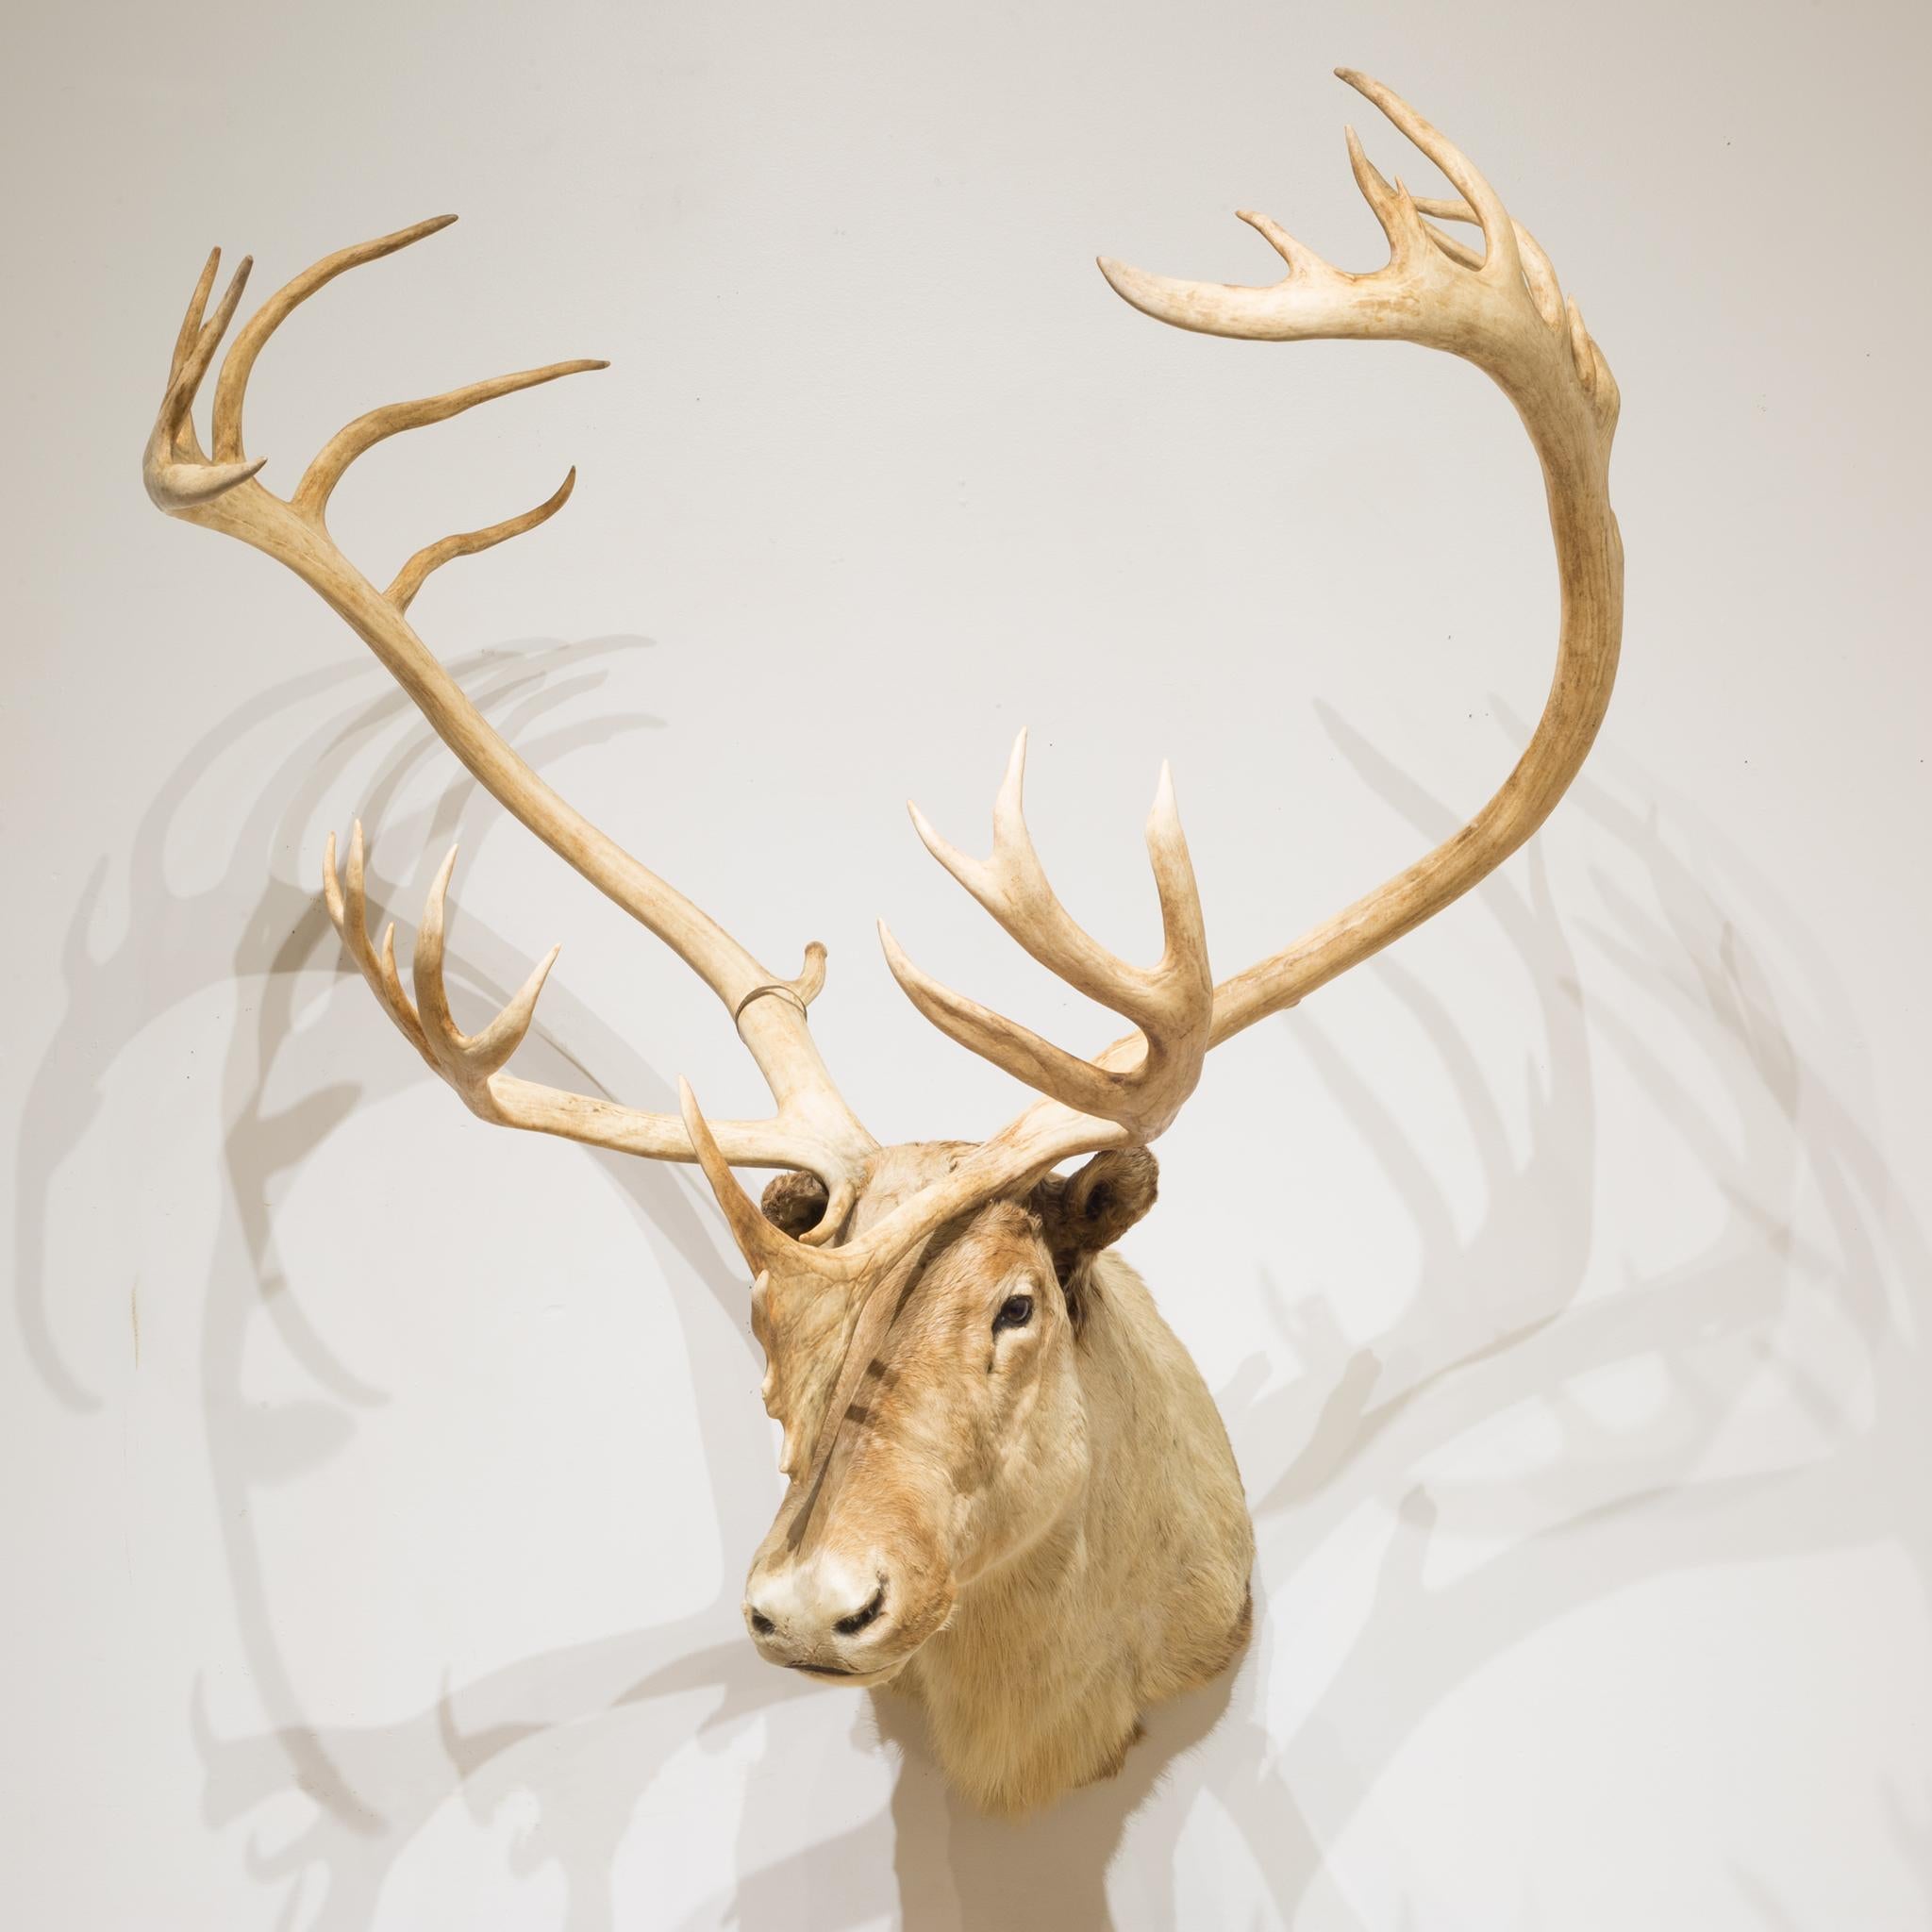 About

This is an original Barren Ground Caribou taxidermy circa 1970, from Northern Canada. The animal is tagged. The piece has retained its original antlers and is in good condition with appropriate patina for its age. There is some minor damage